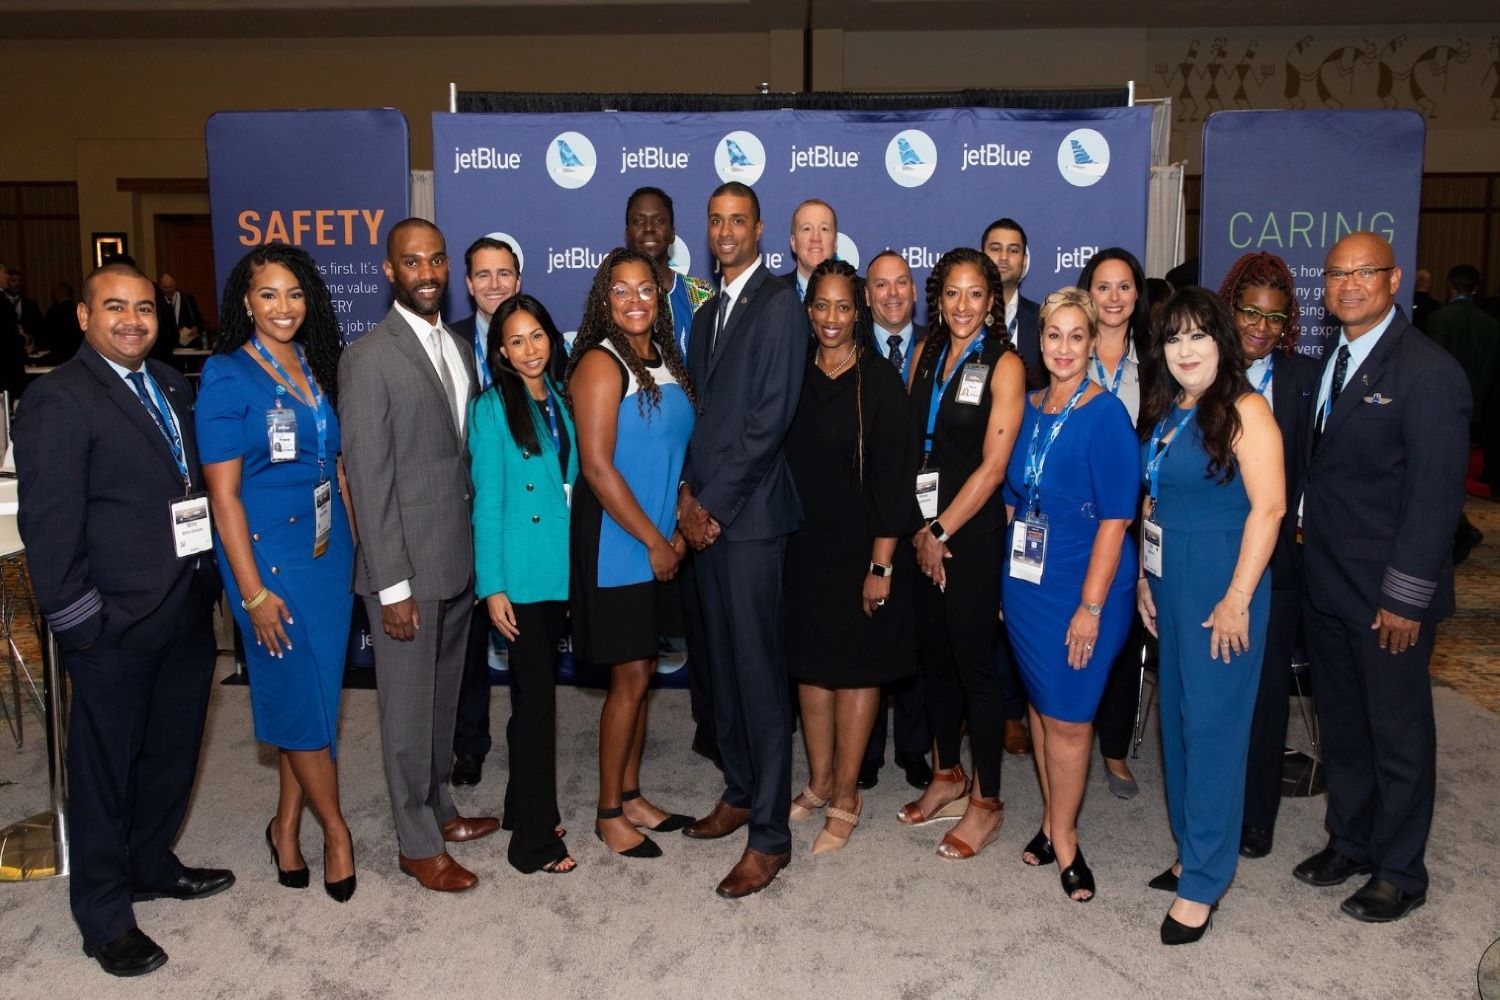 JetBlue staff at a conference